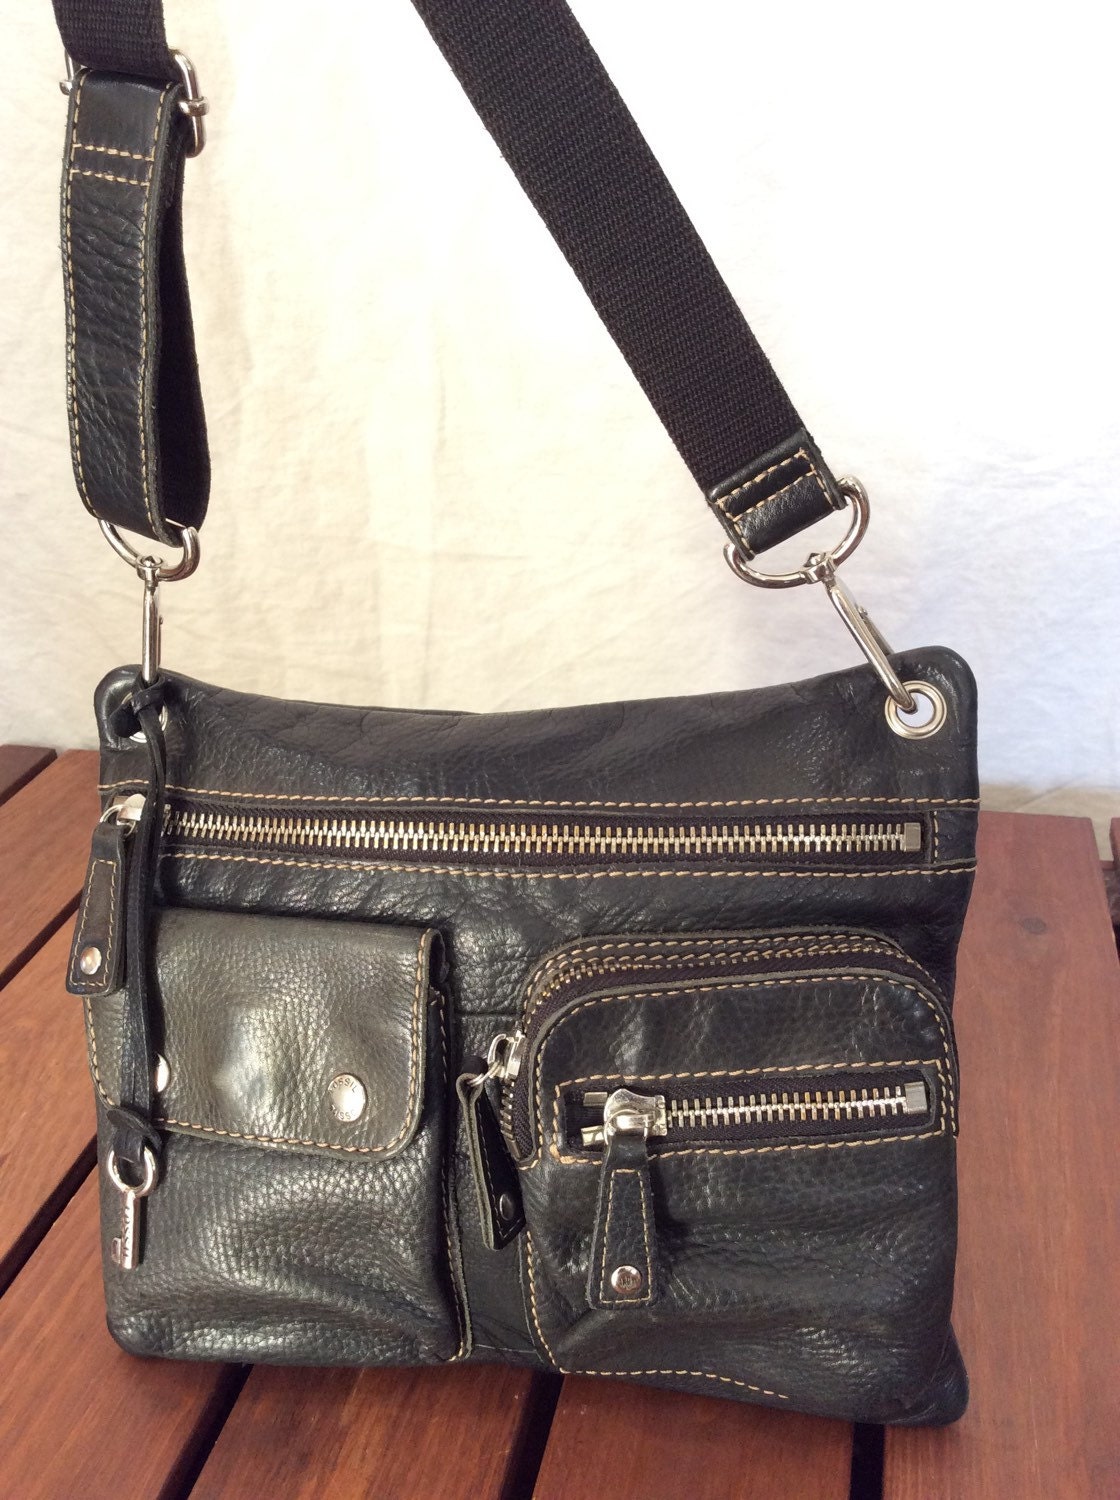 Great Vintage Authentic Fossil Black Leather Crossbody Bag